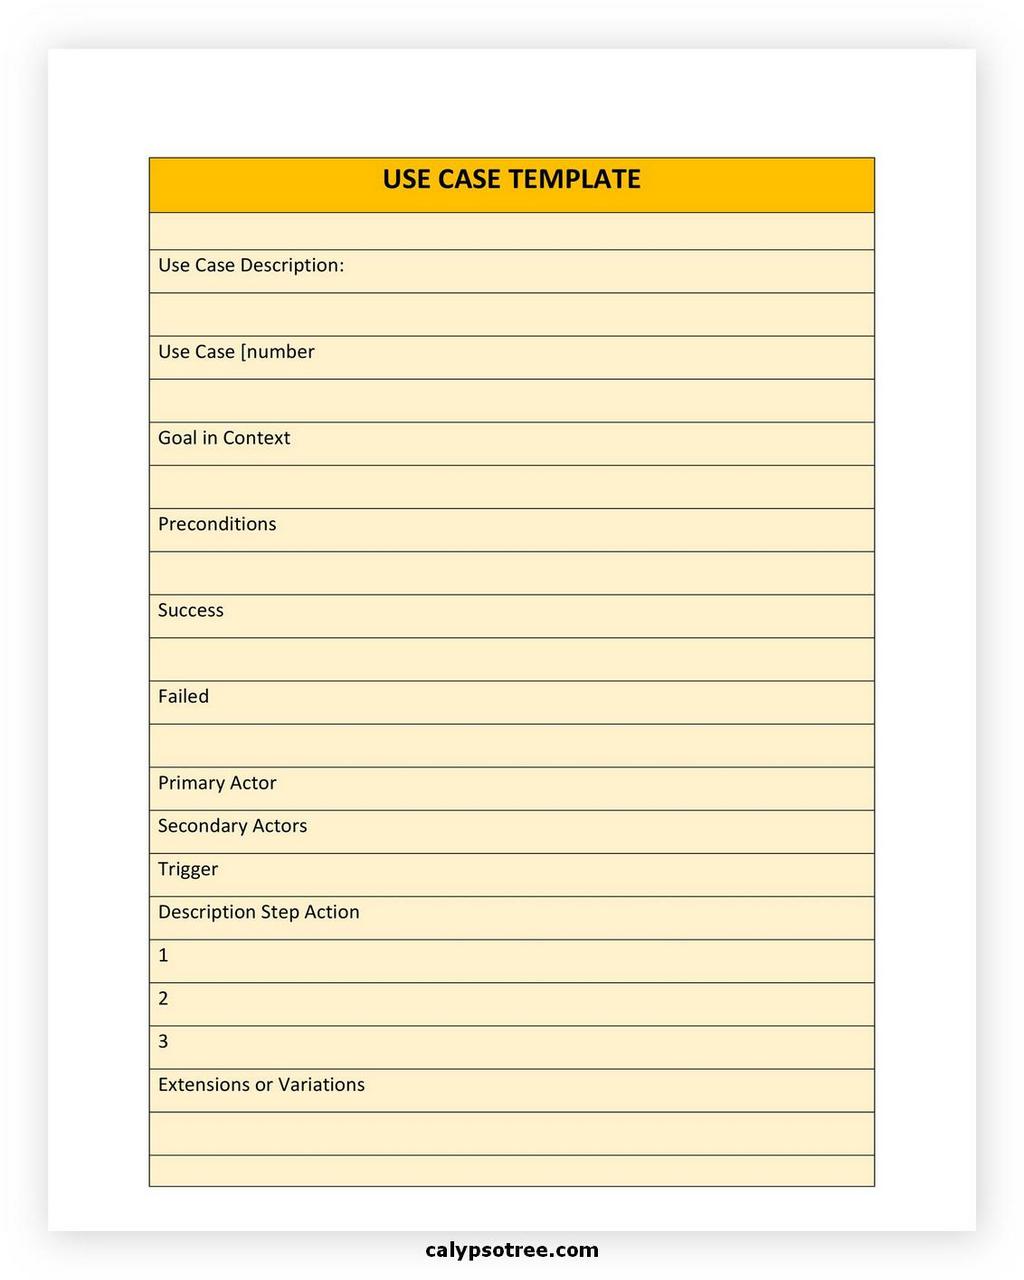 use case template excel 07 1